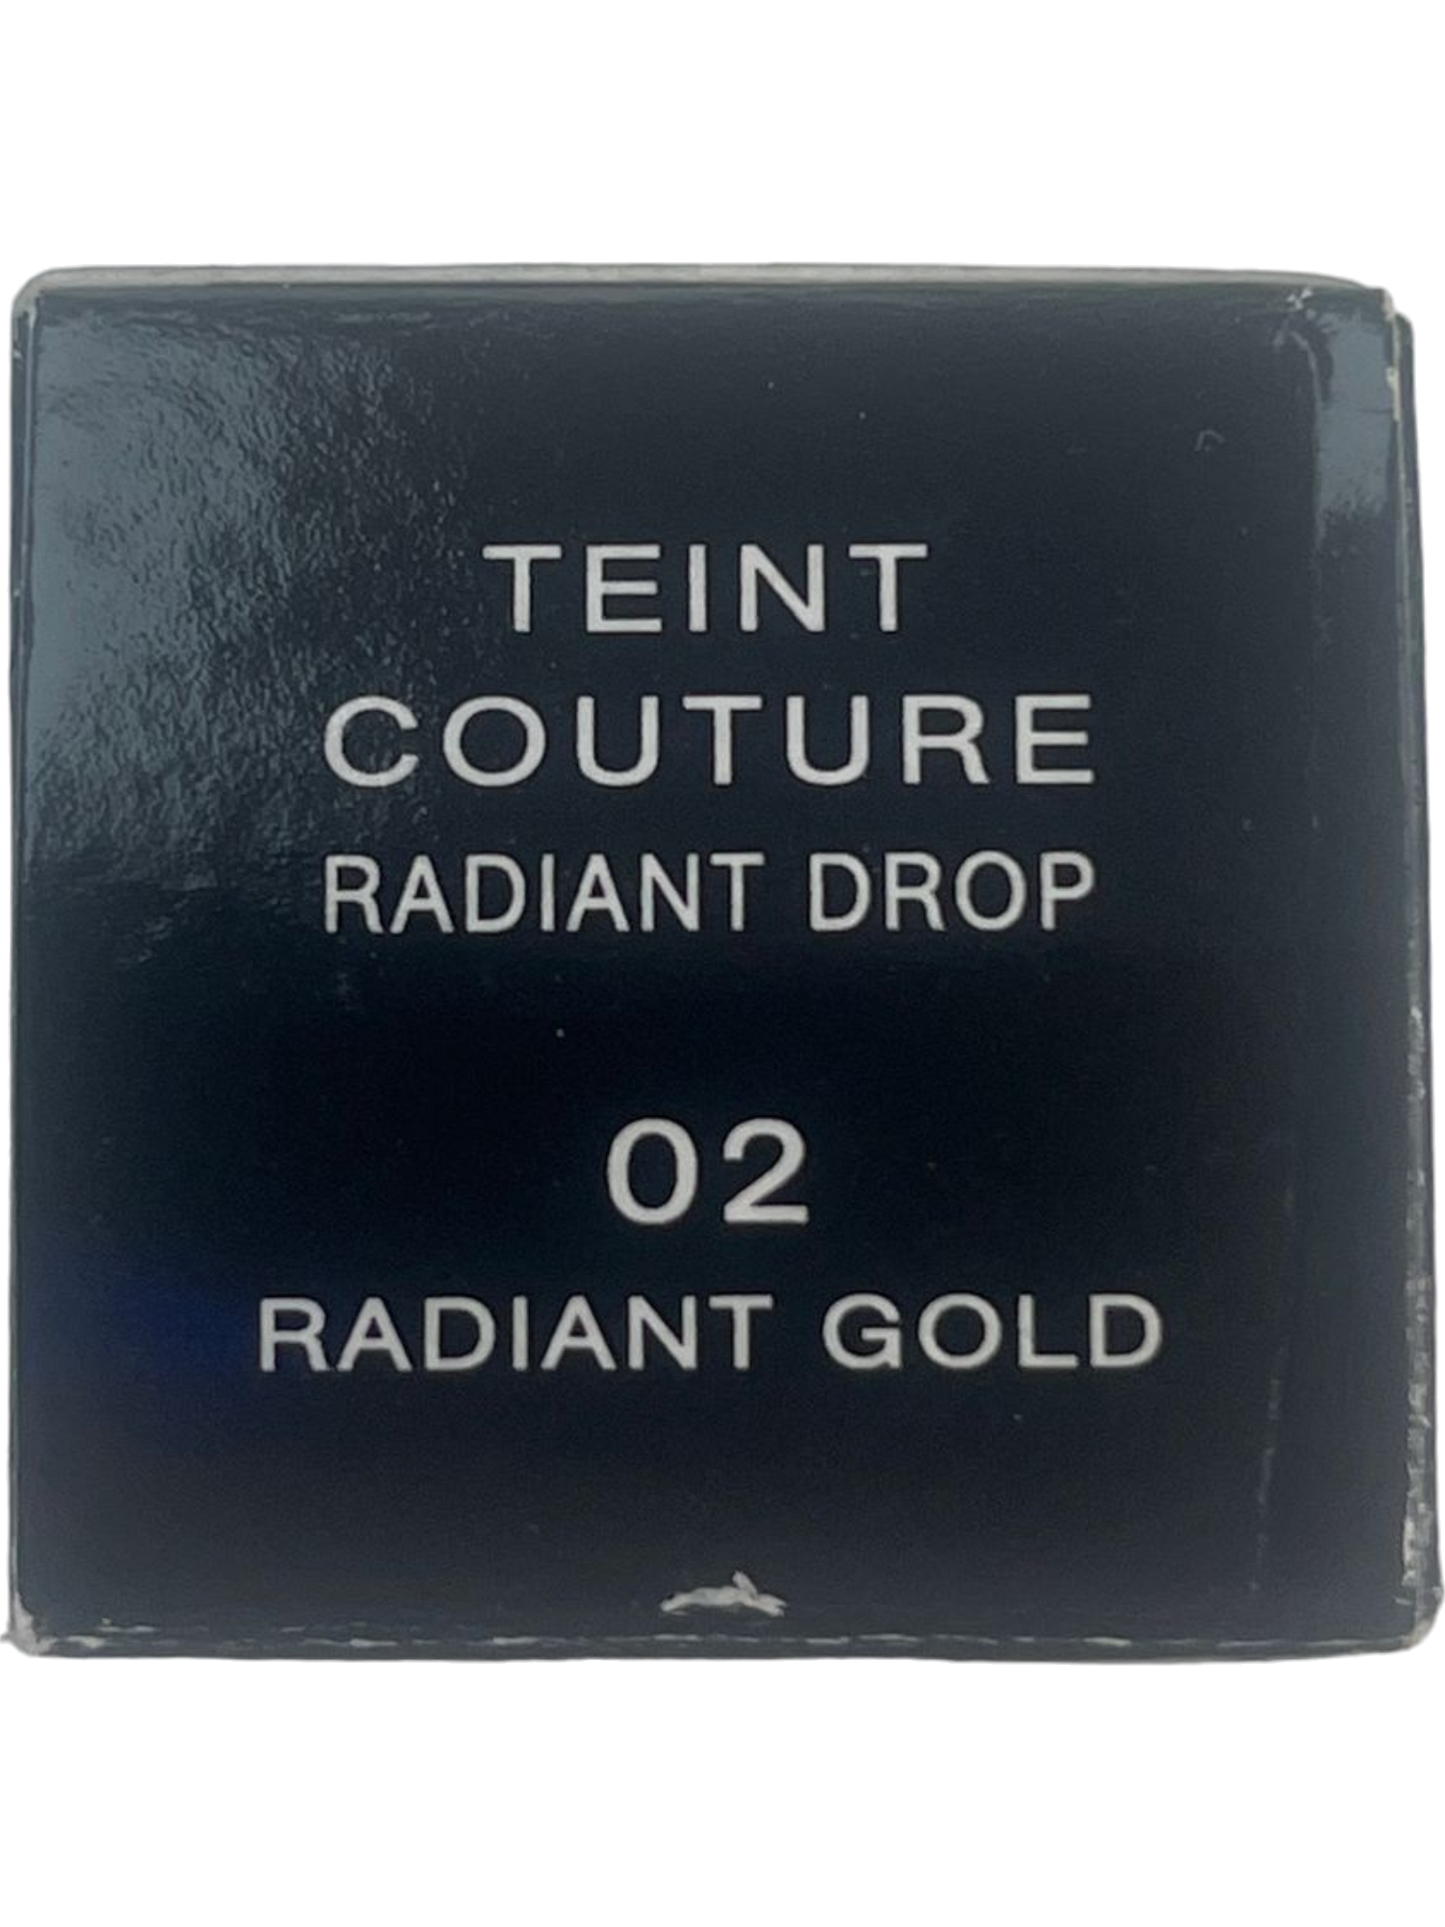 Givenchy Teint Couture Radiant Drop 2 in 1 Highlighter - Radiant Gold 15ml